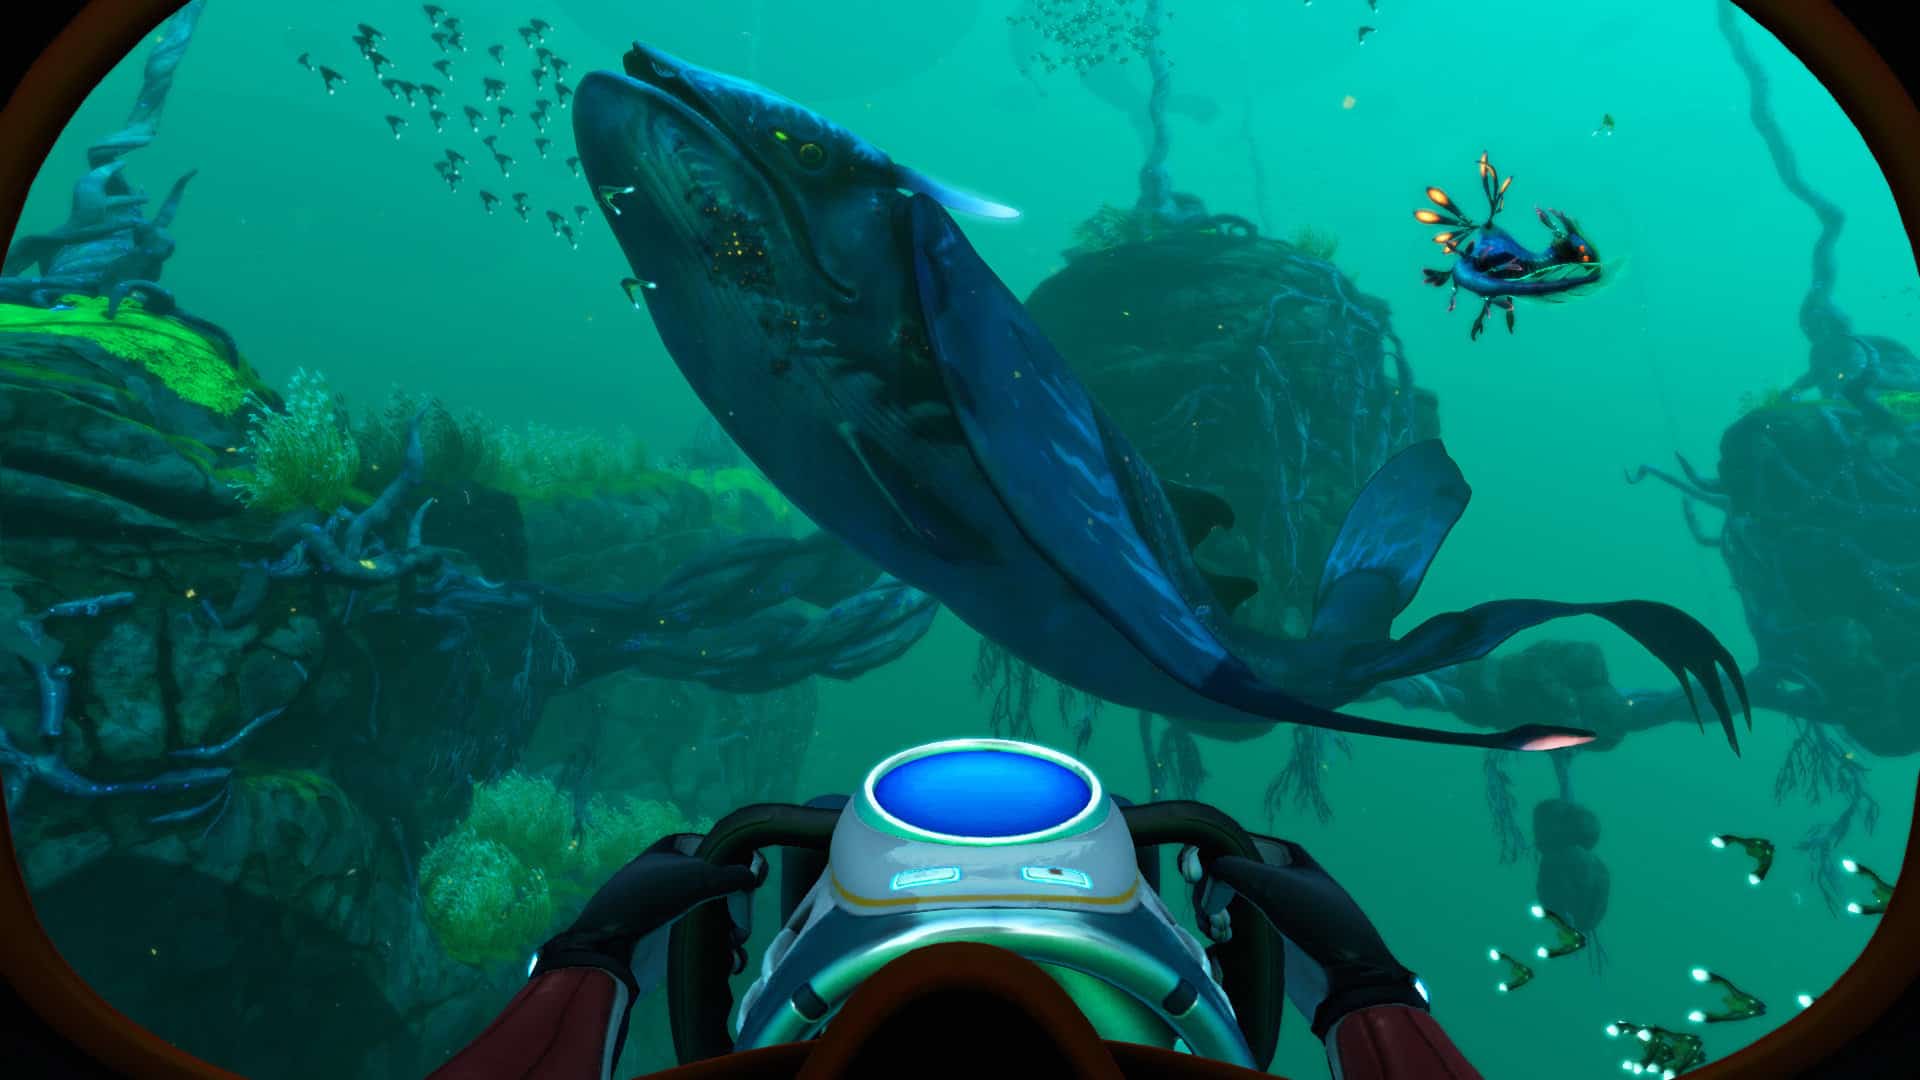 A new Subnautica game is in development at Unknown Worlds